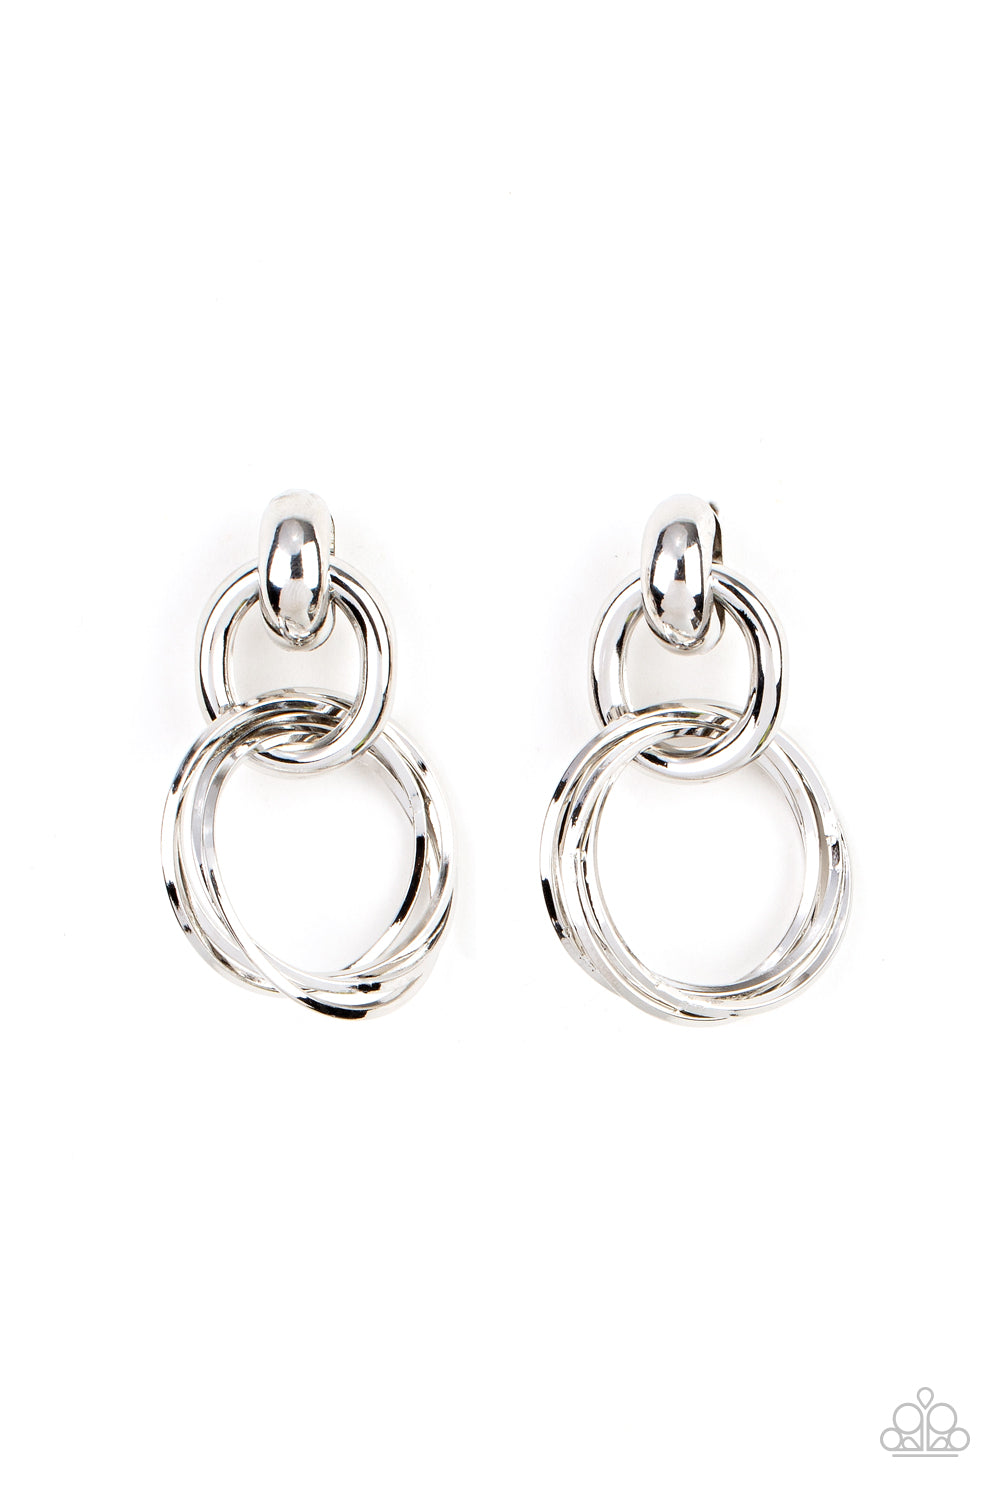 Dynamically Linked - Silver Earrings - Princess Glam Shop